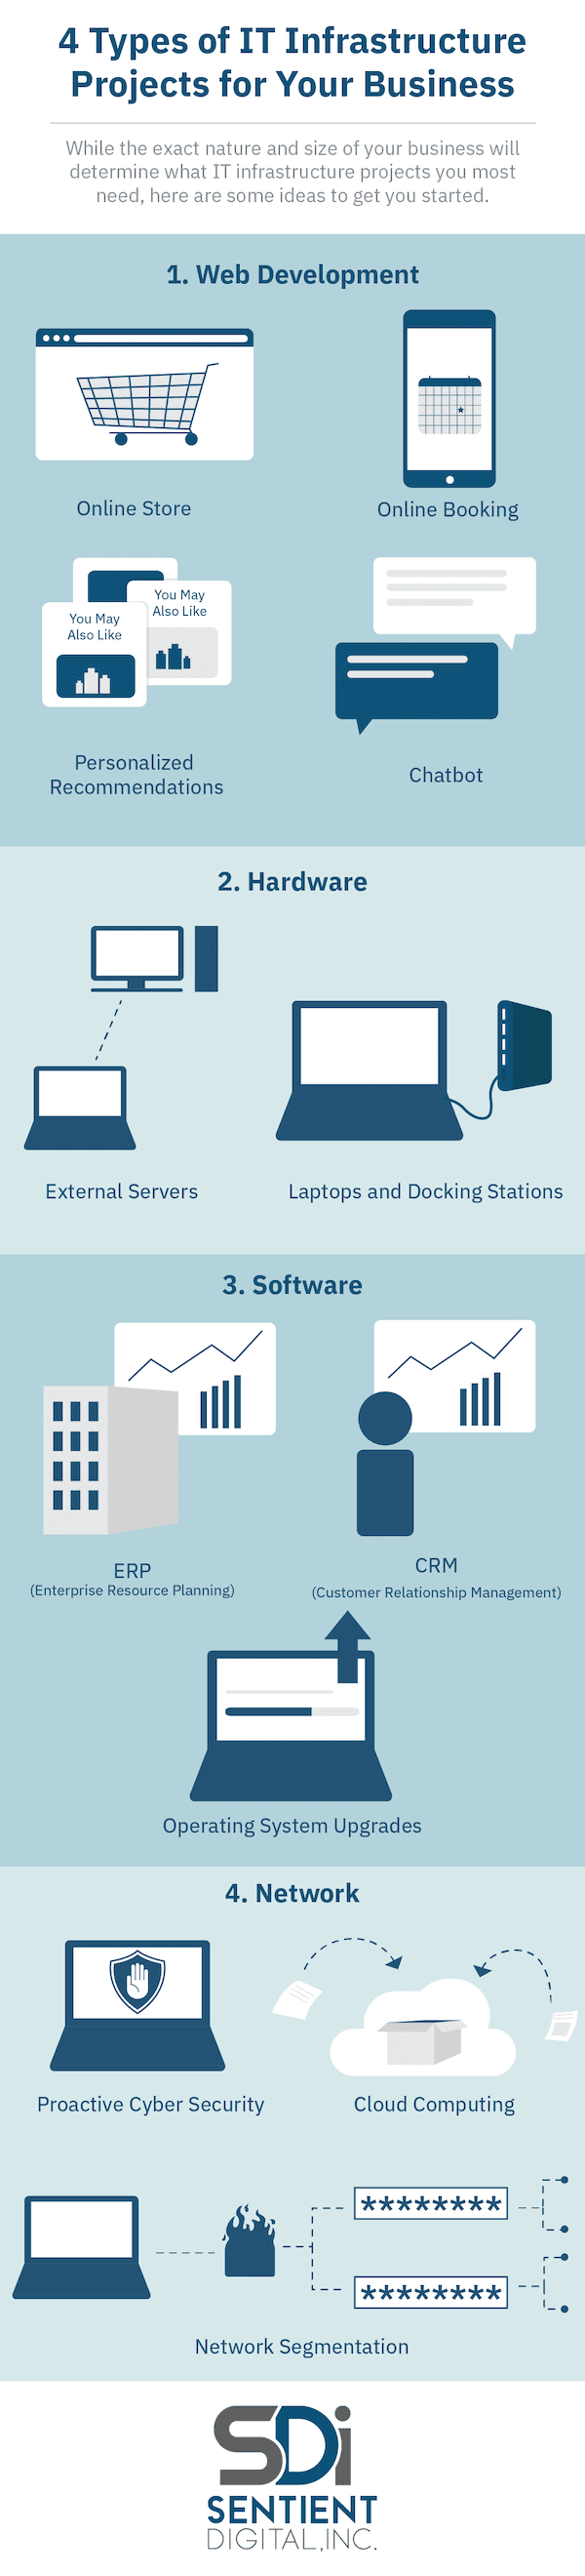 SDi graphic about Types of IT Infrastructure Projects